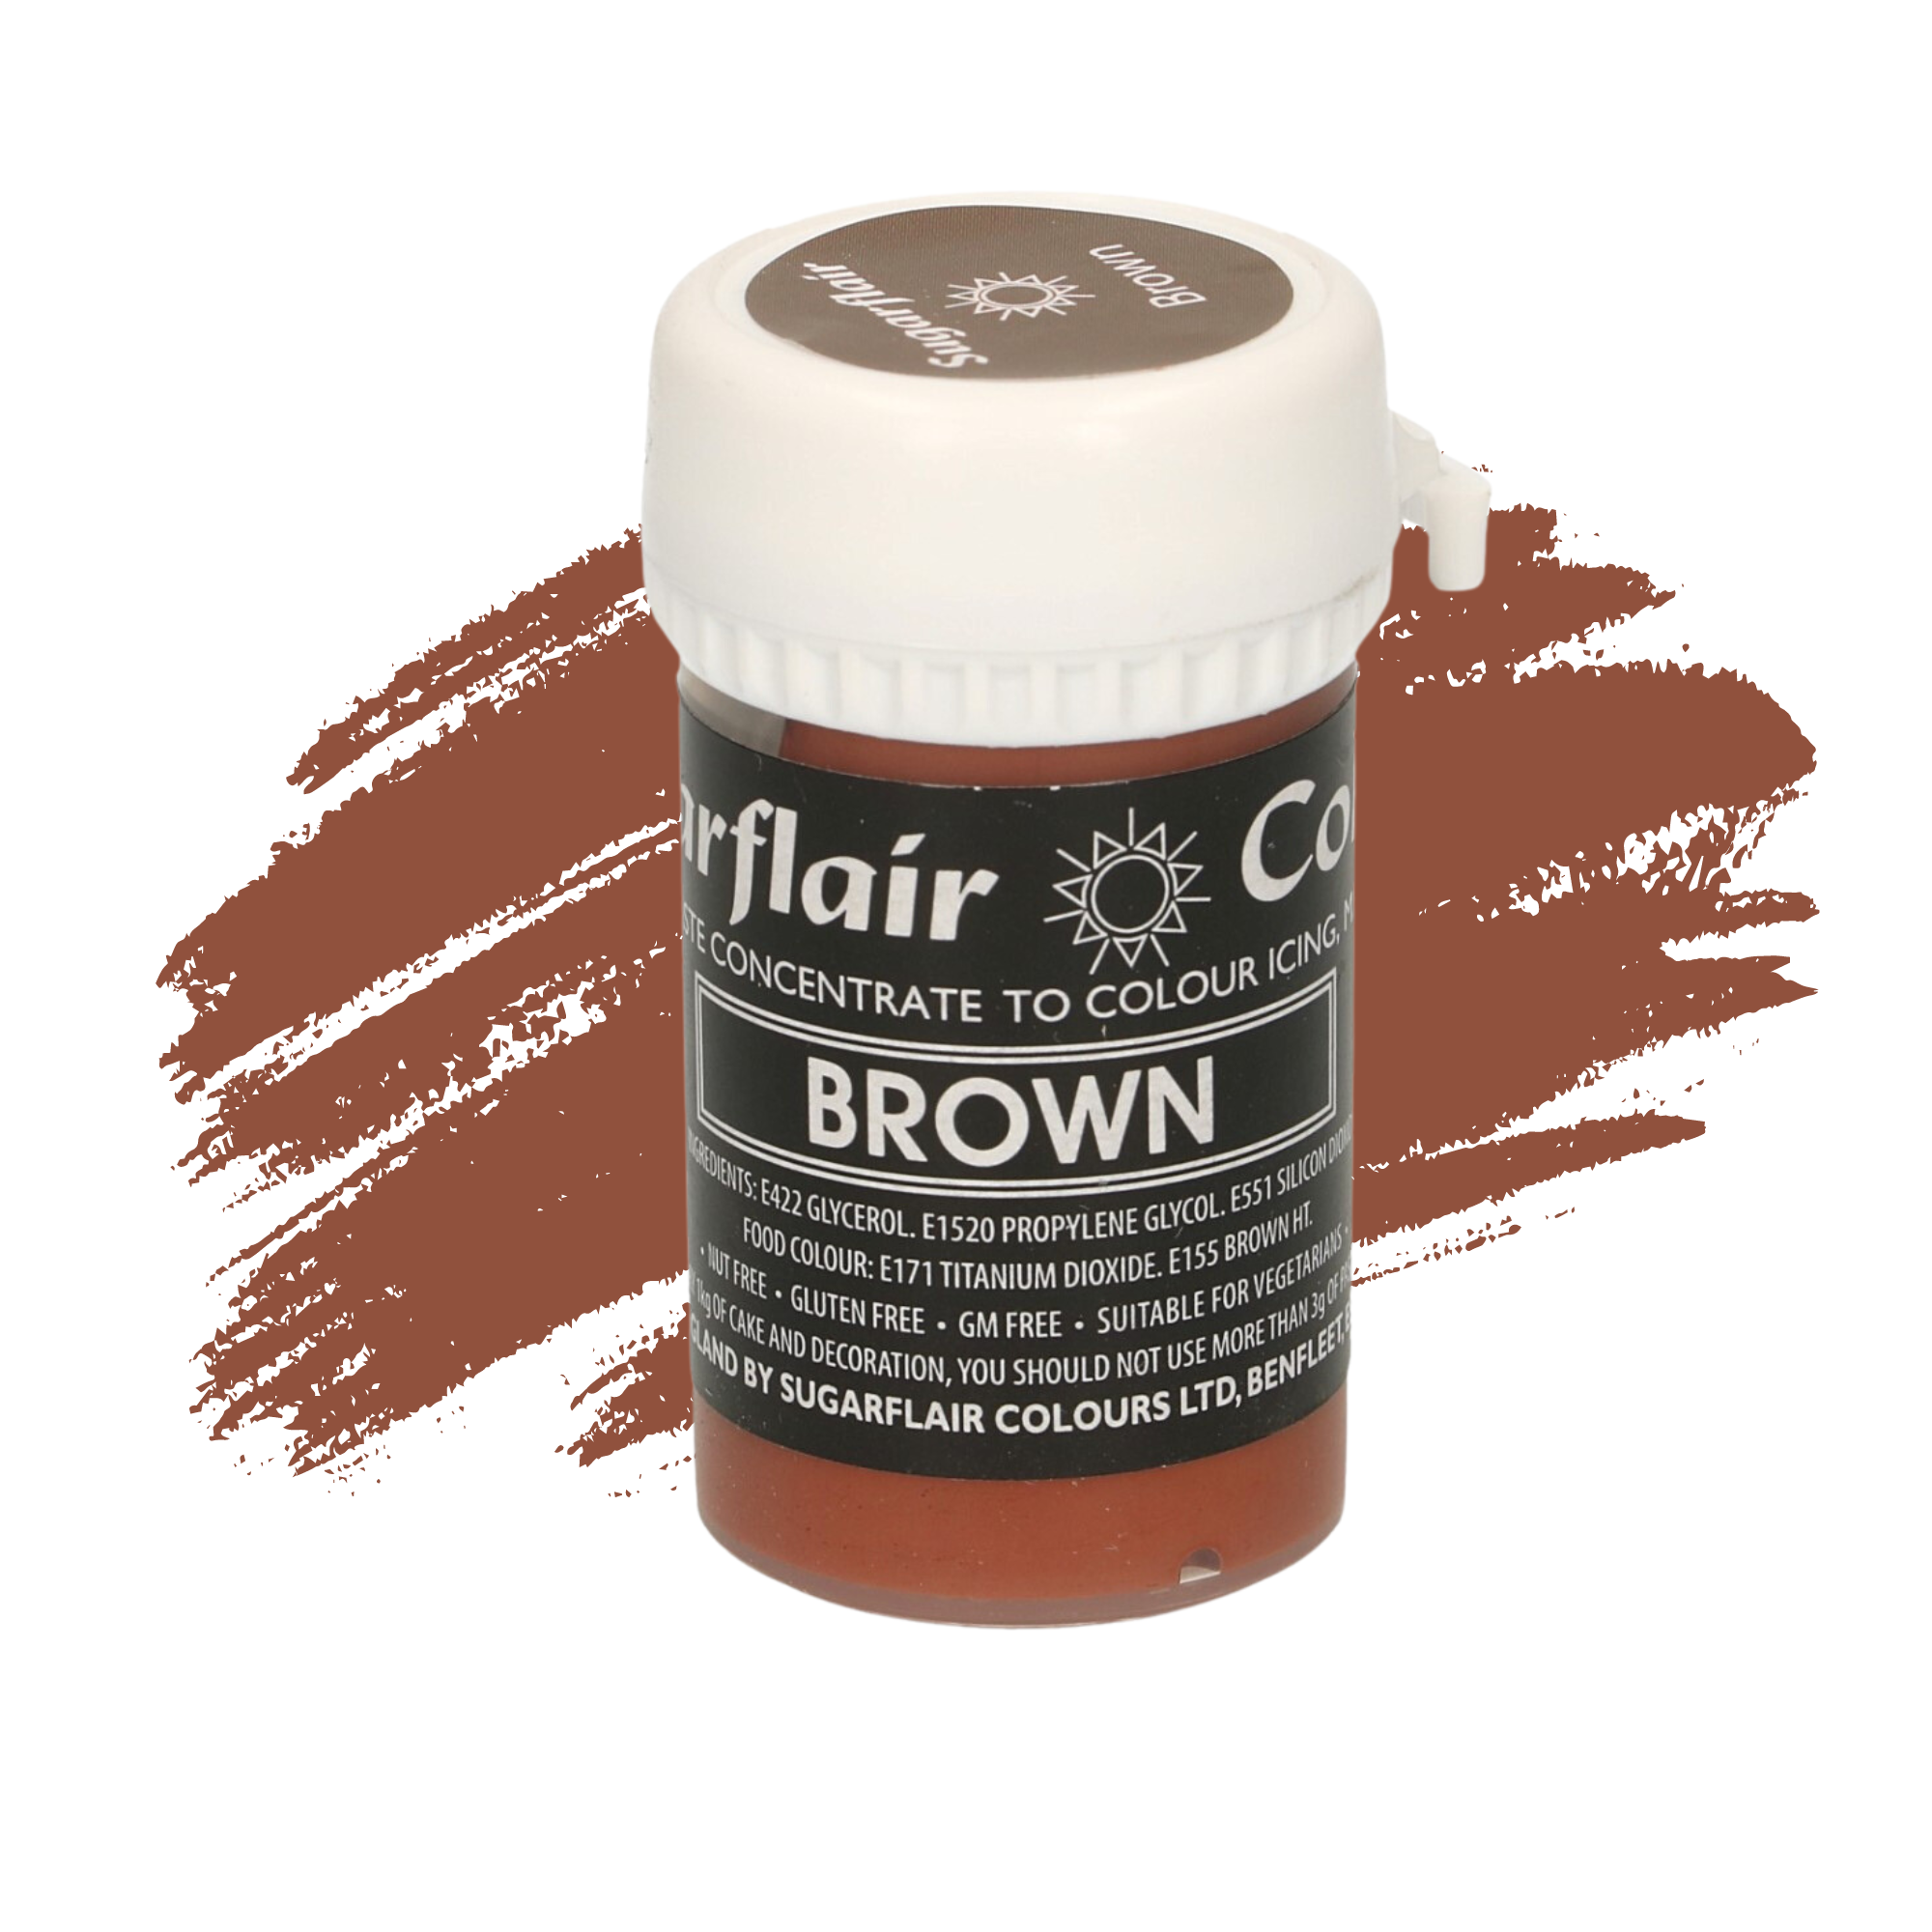 Sugarflair Paste Colours Concentrated Food Colouring - Pastel Brown - 25g